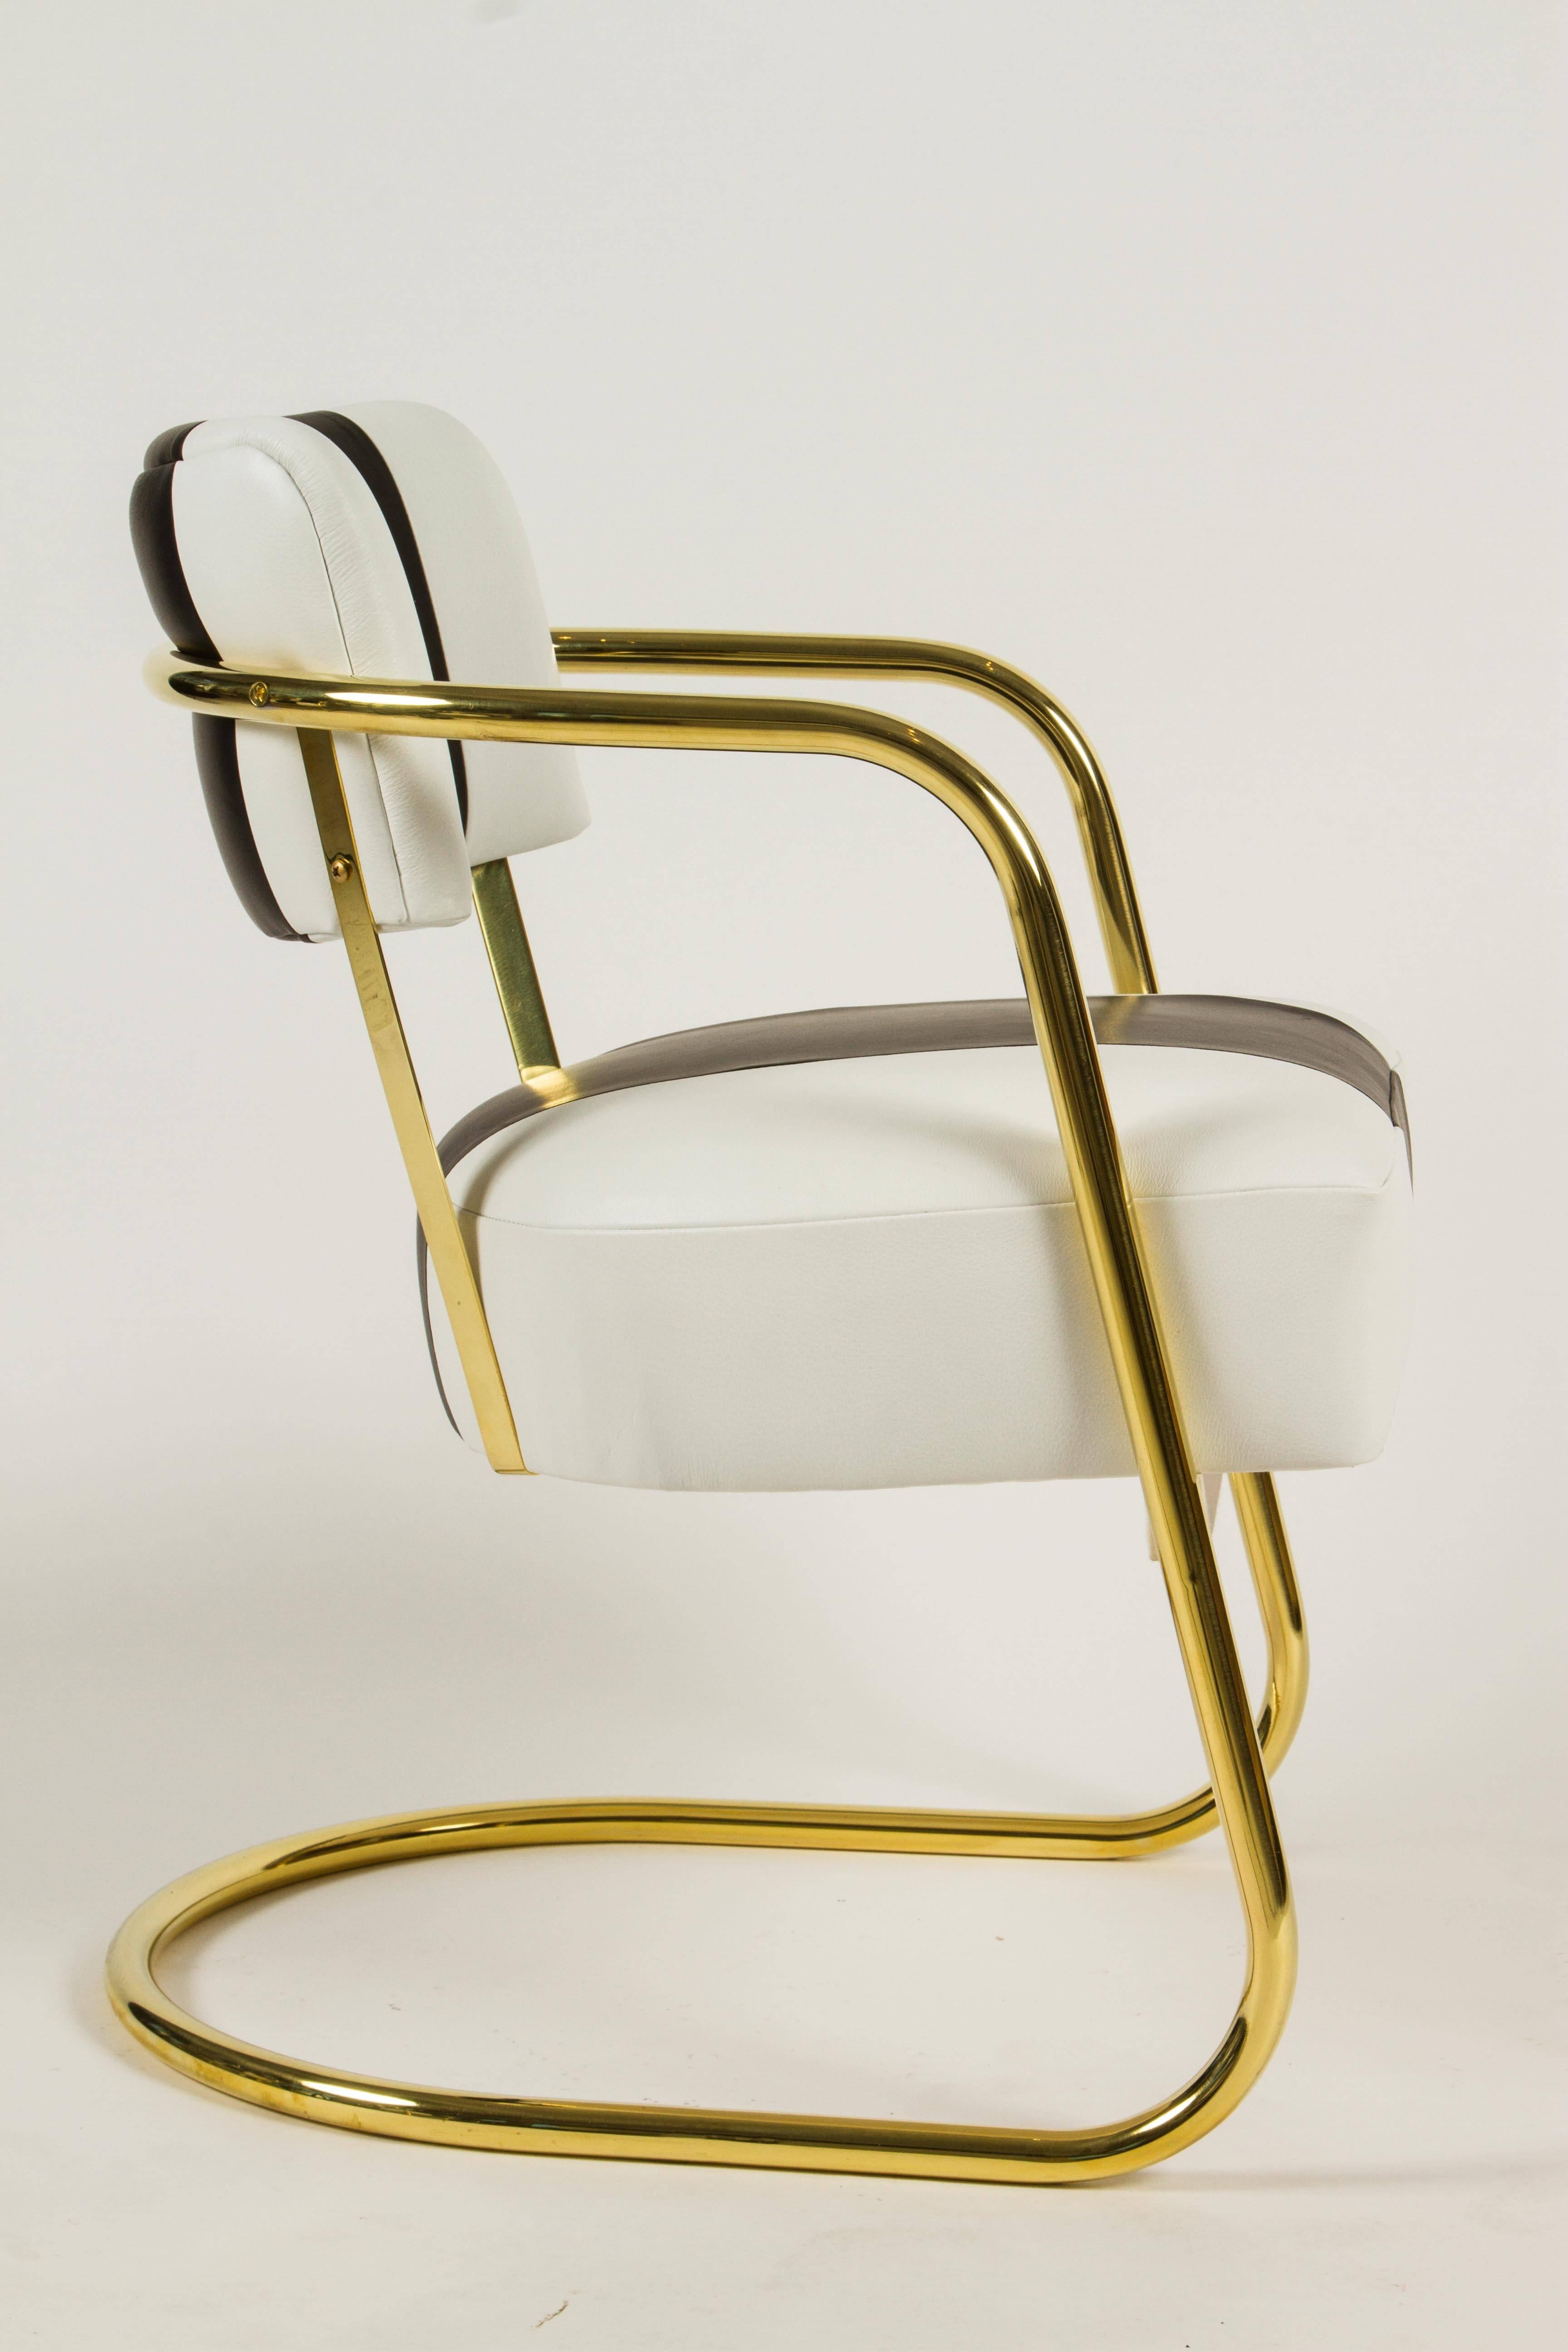 A great group of six period Art Deco chairs attributed to Gilbert Rhode.
The chairs have been plated in brass for a more contemporary feel and have been reupholstered in white leather with a contrasting black leather stripe down the center of the